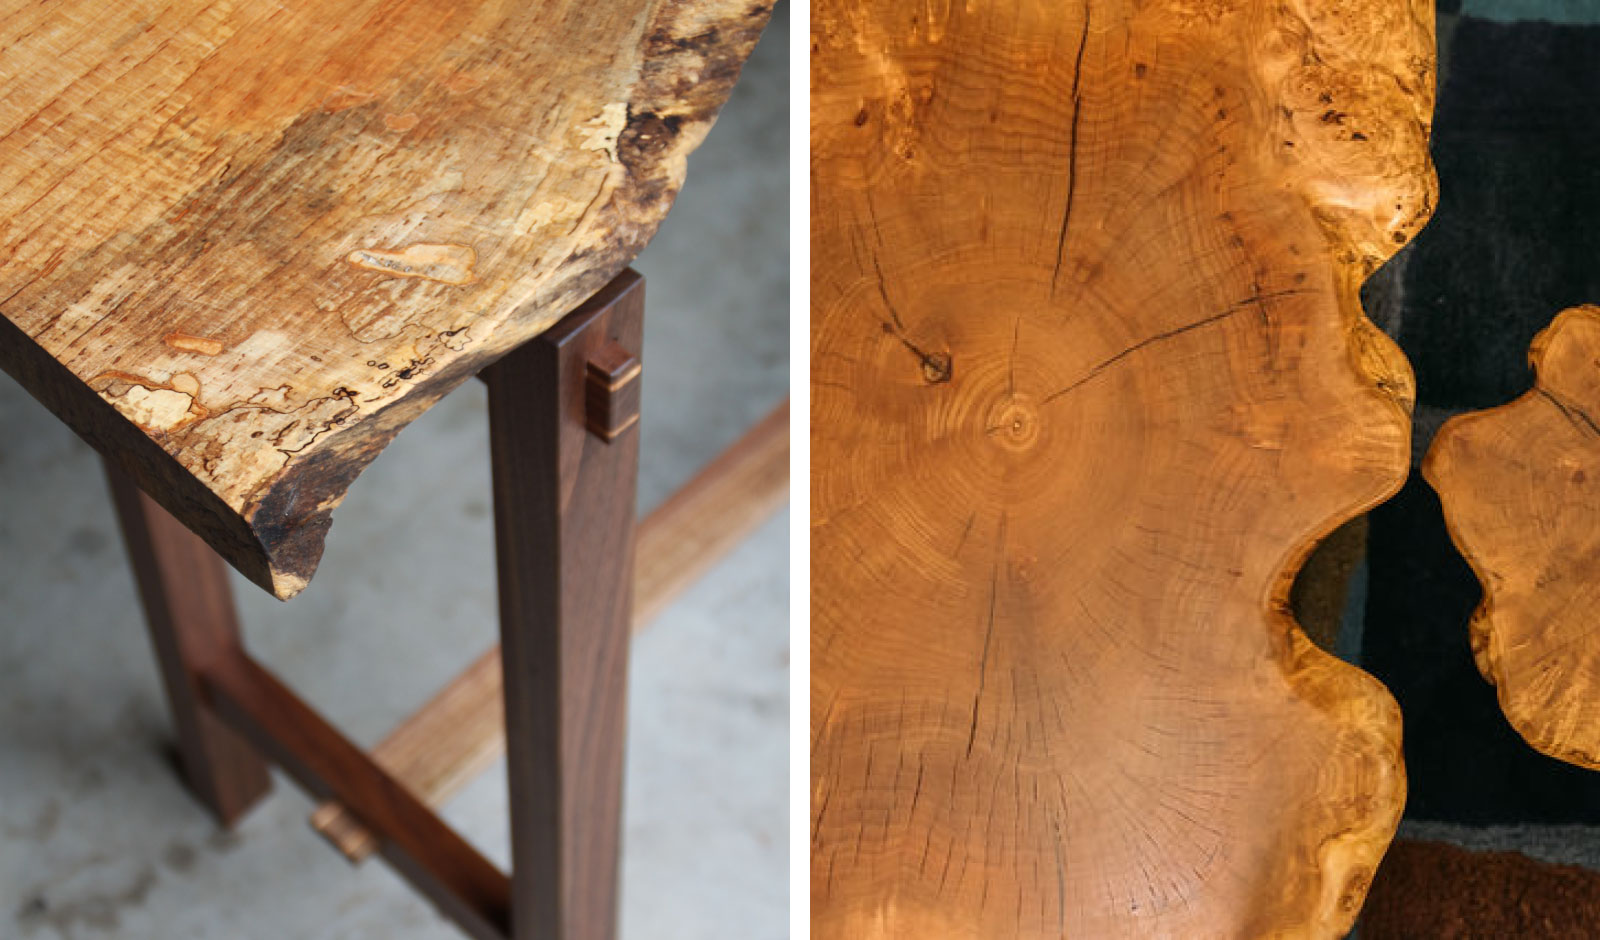 Details from two pieces of live edge furniture, showing knots, pitch pockets and grain variations